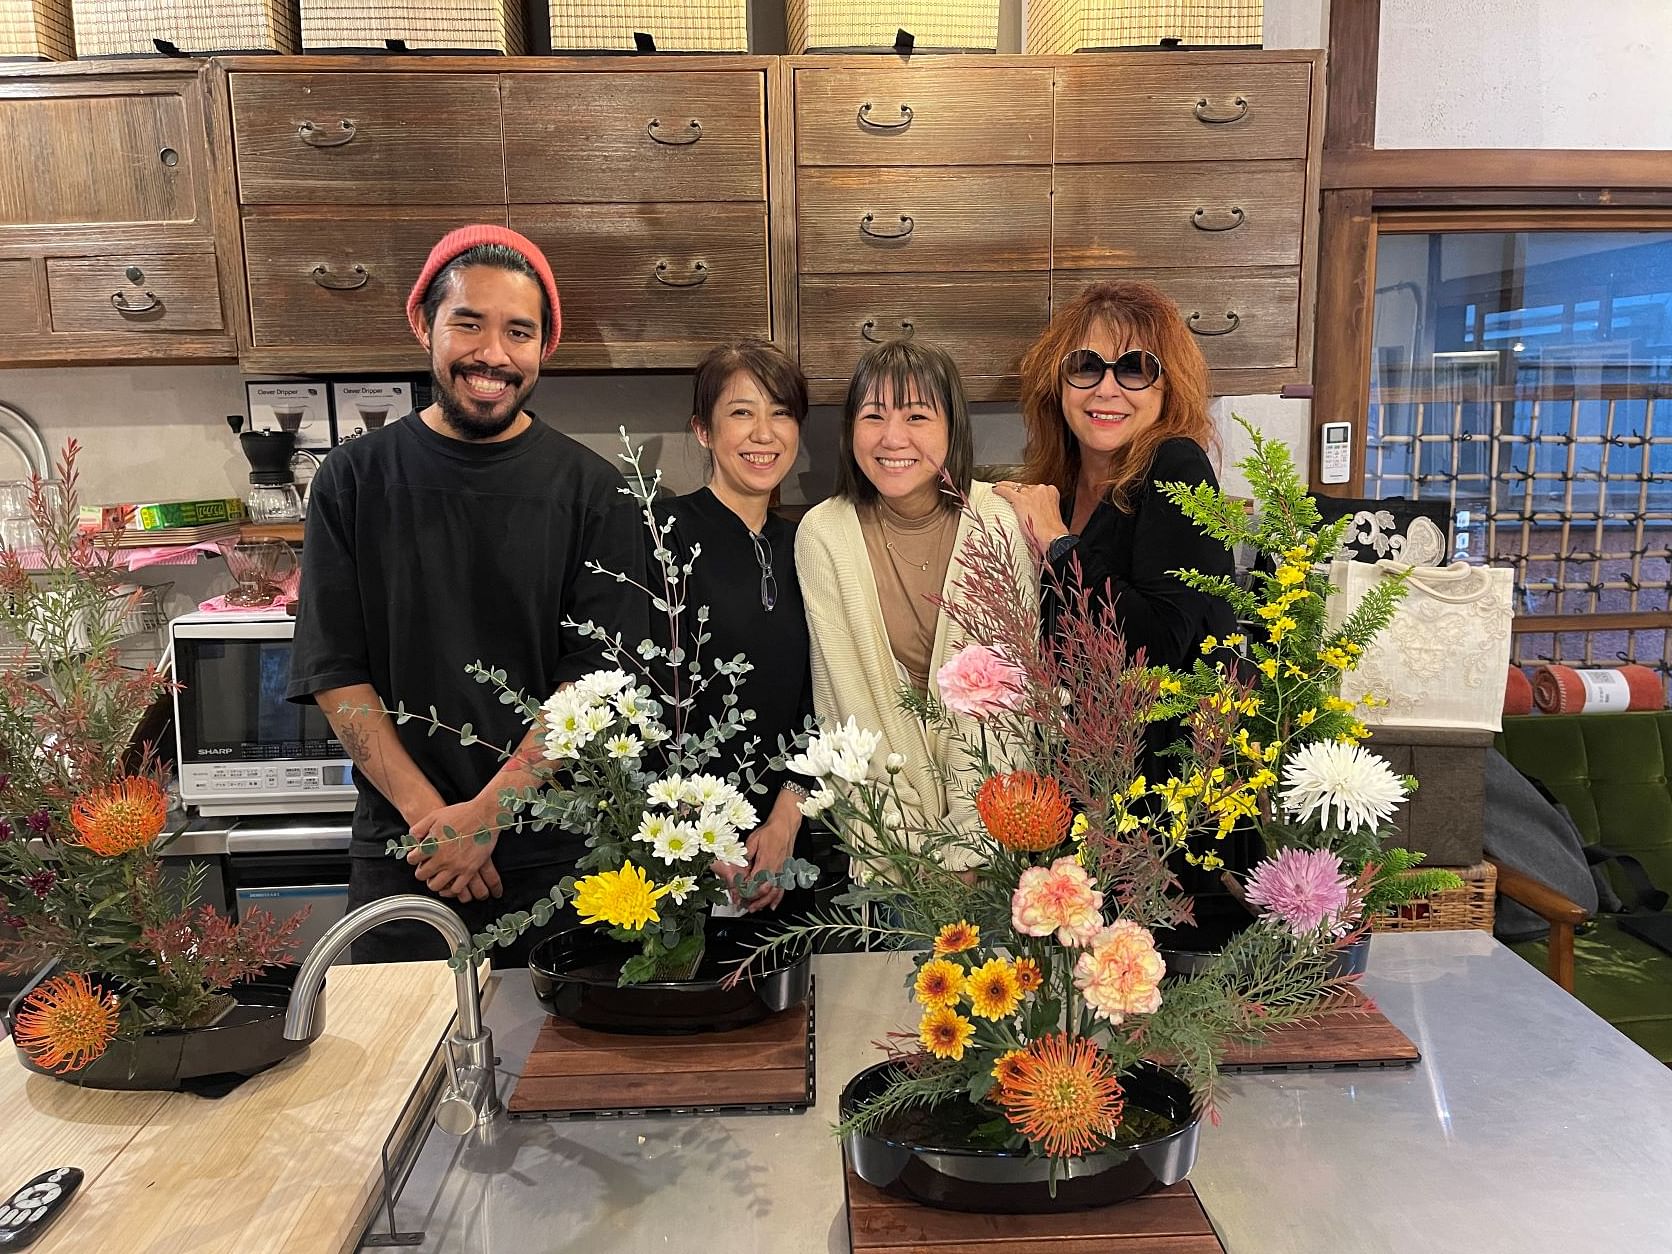 Private Flower arrangement experience (KADO) in Kyoto